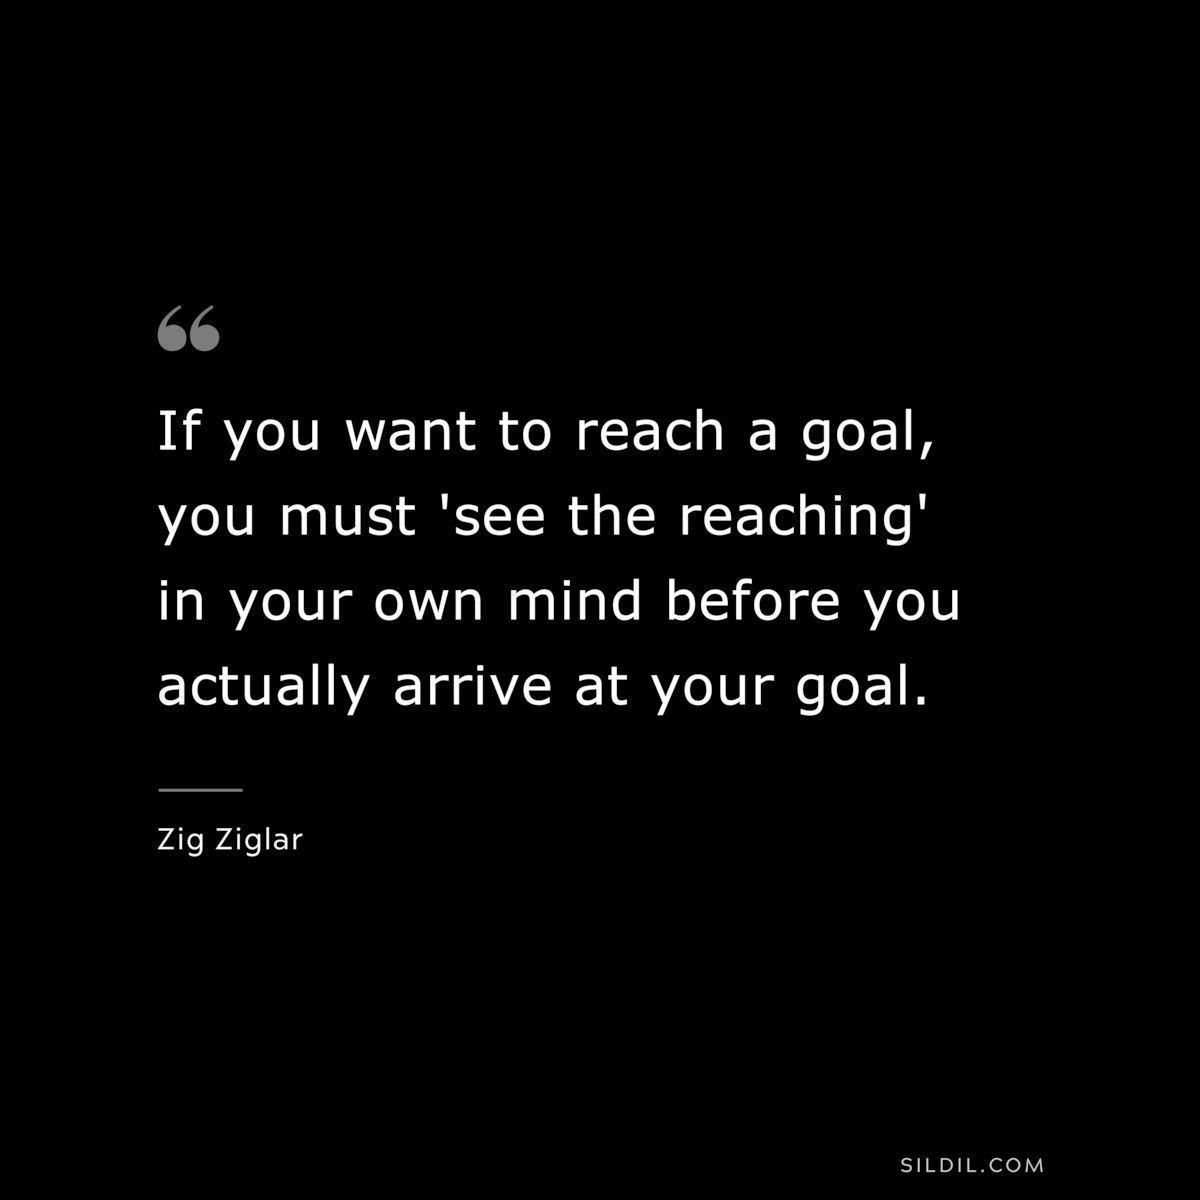 If you want to reach a goal, you must 'see the reaching' in your own mind before you actually arrive at your goal. ― Zig Ziglar